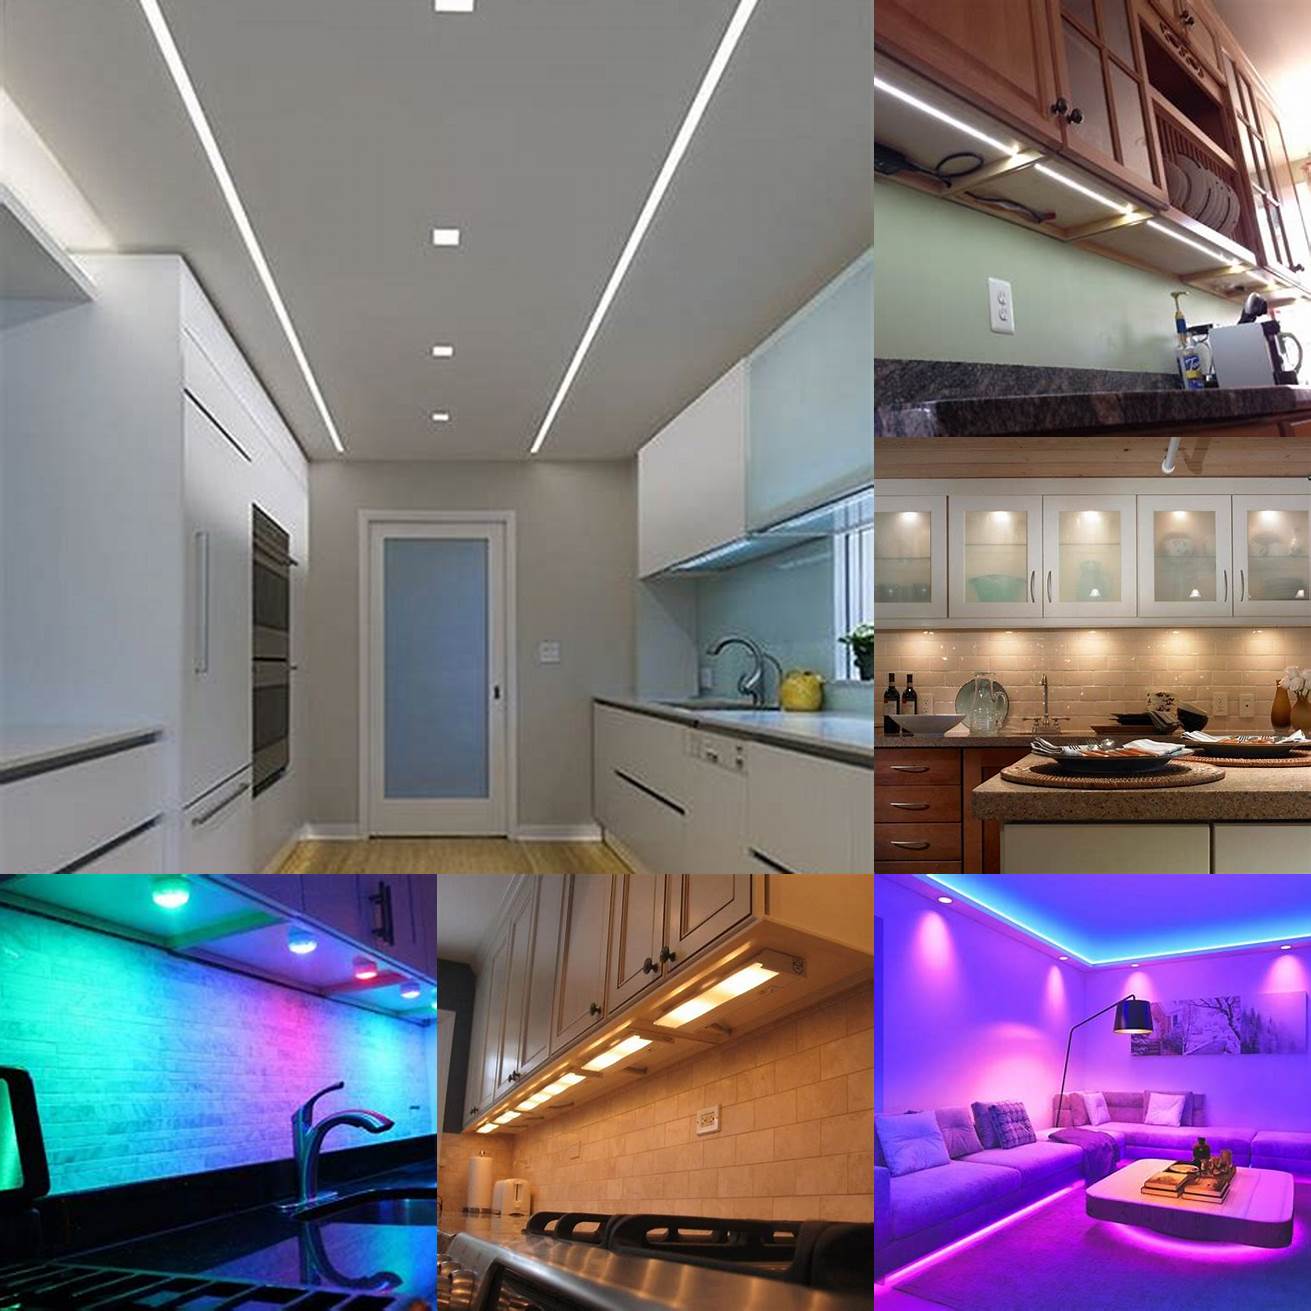 5 Illuminate your decor by adding LED strip lights or puck lights above your cabinets